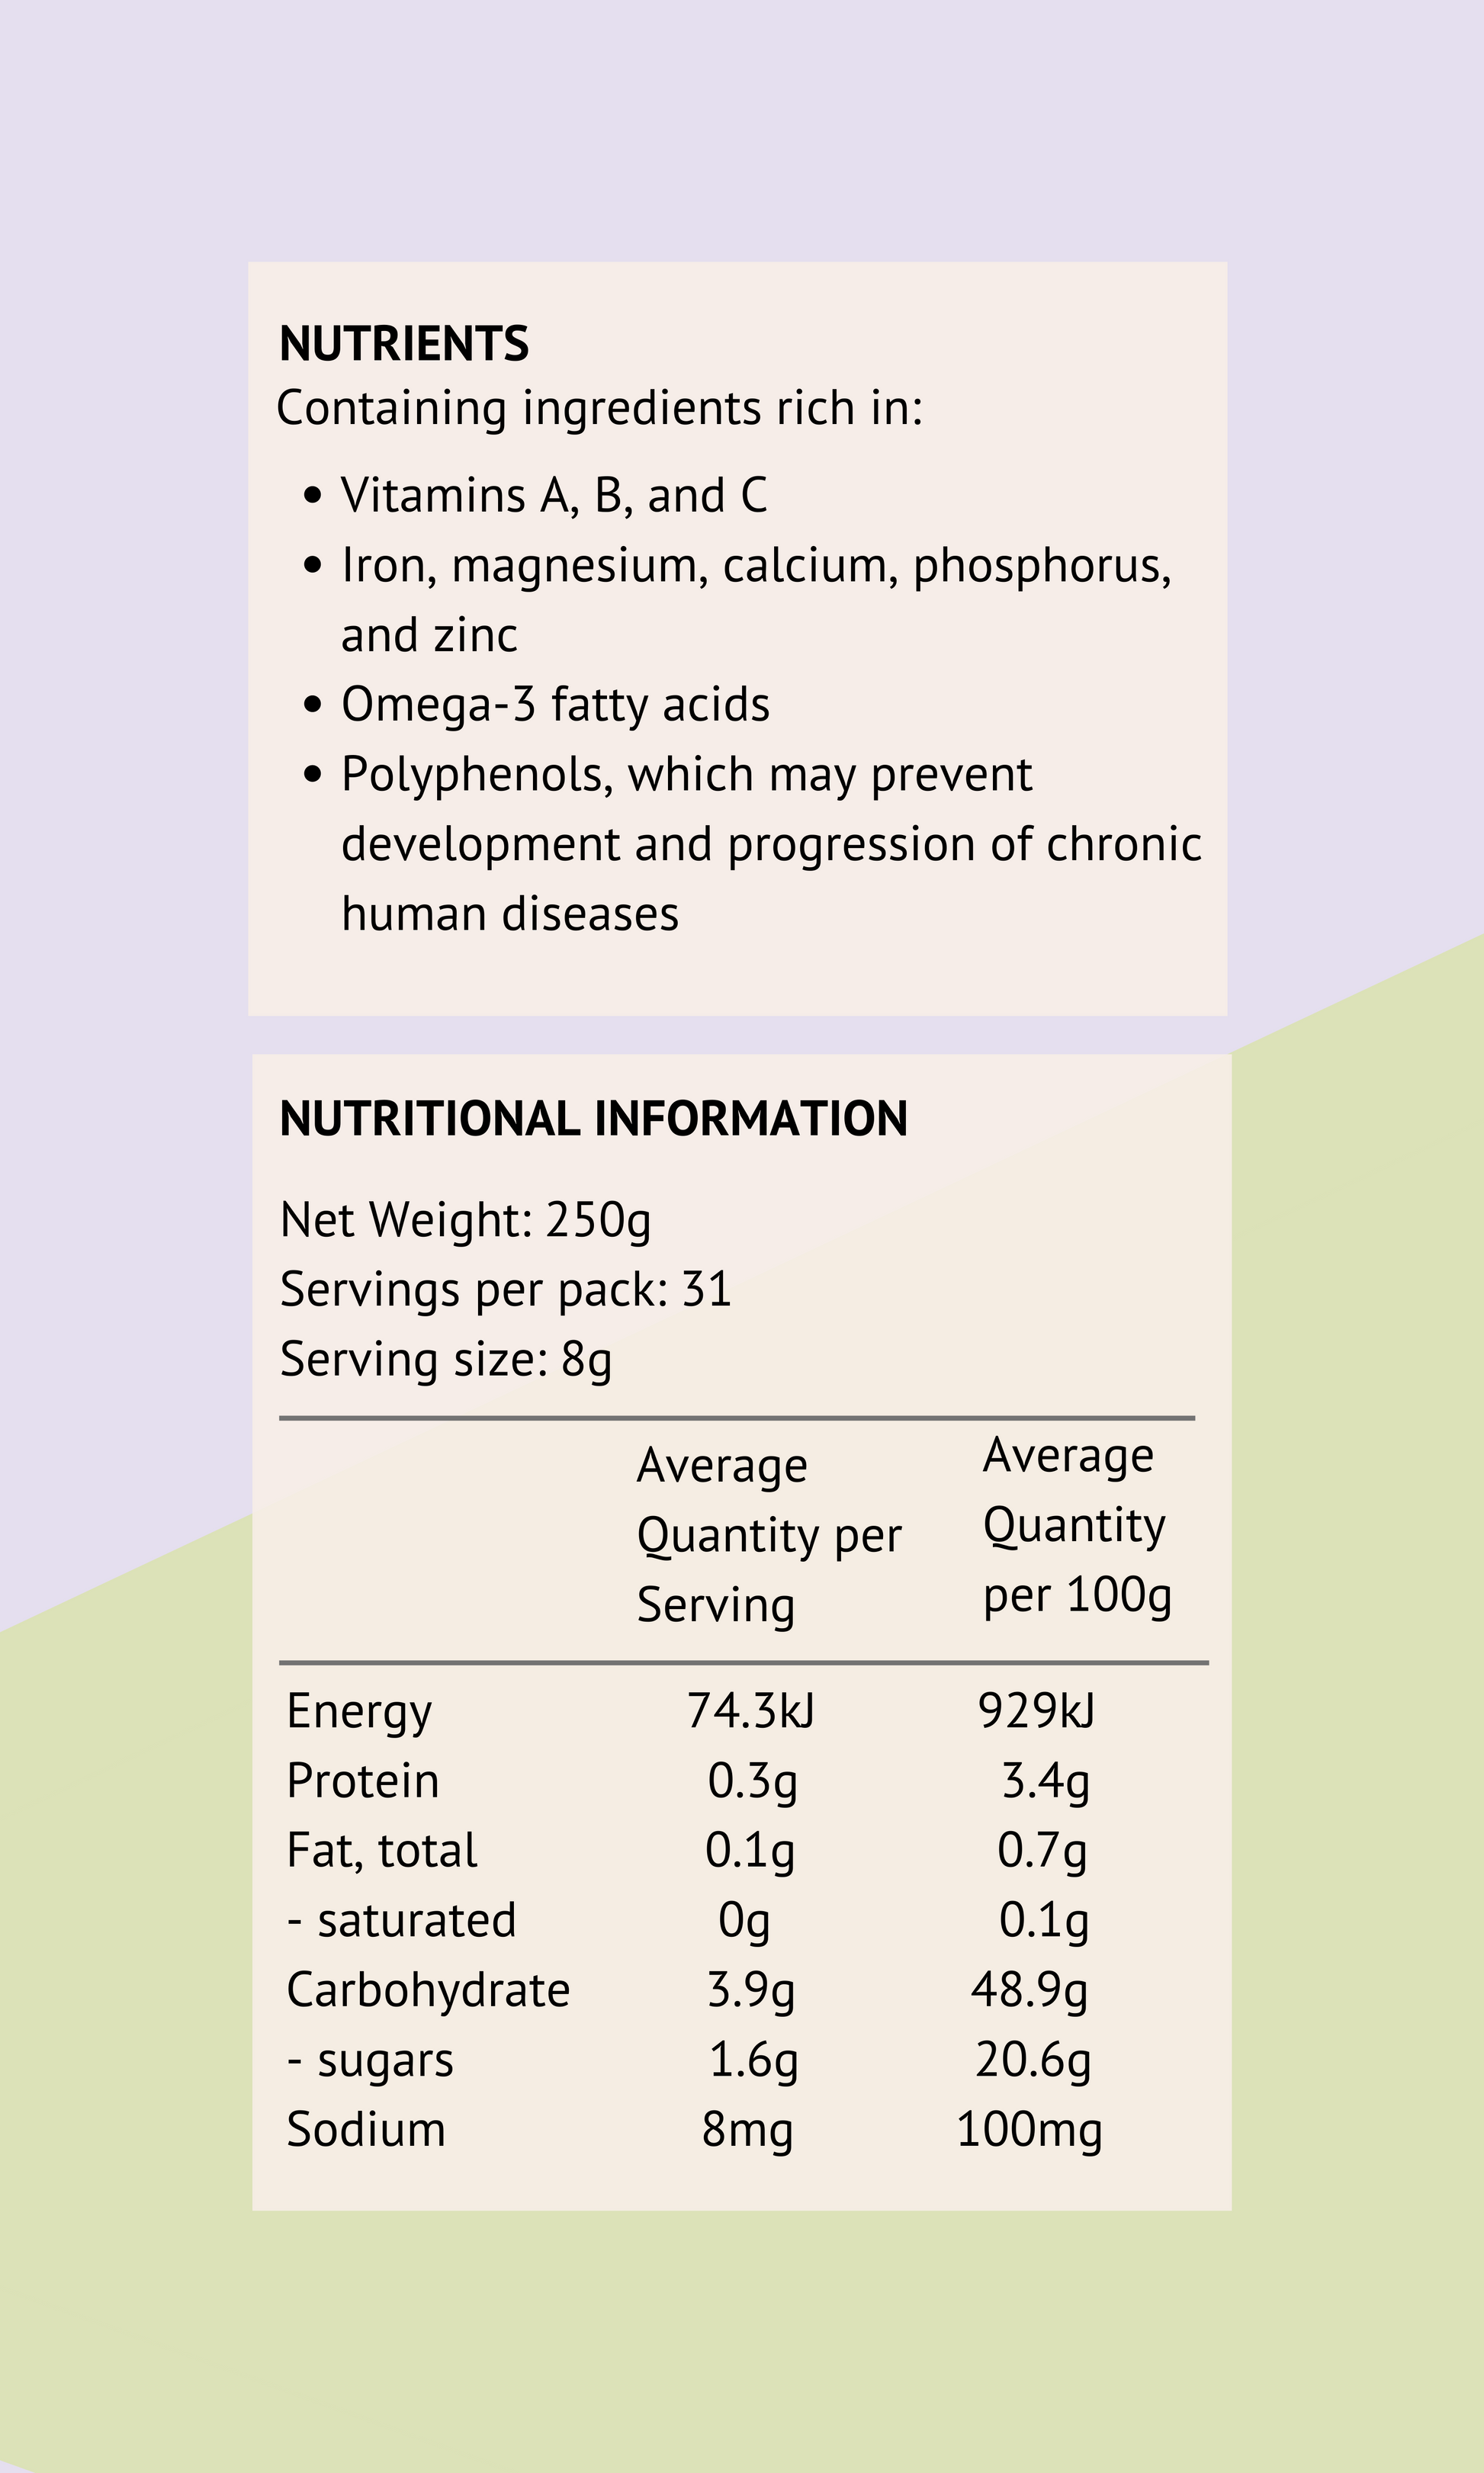 Nutritional Information for Wild Harvest Co Body Cleanse Supplement